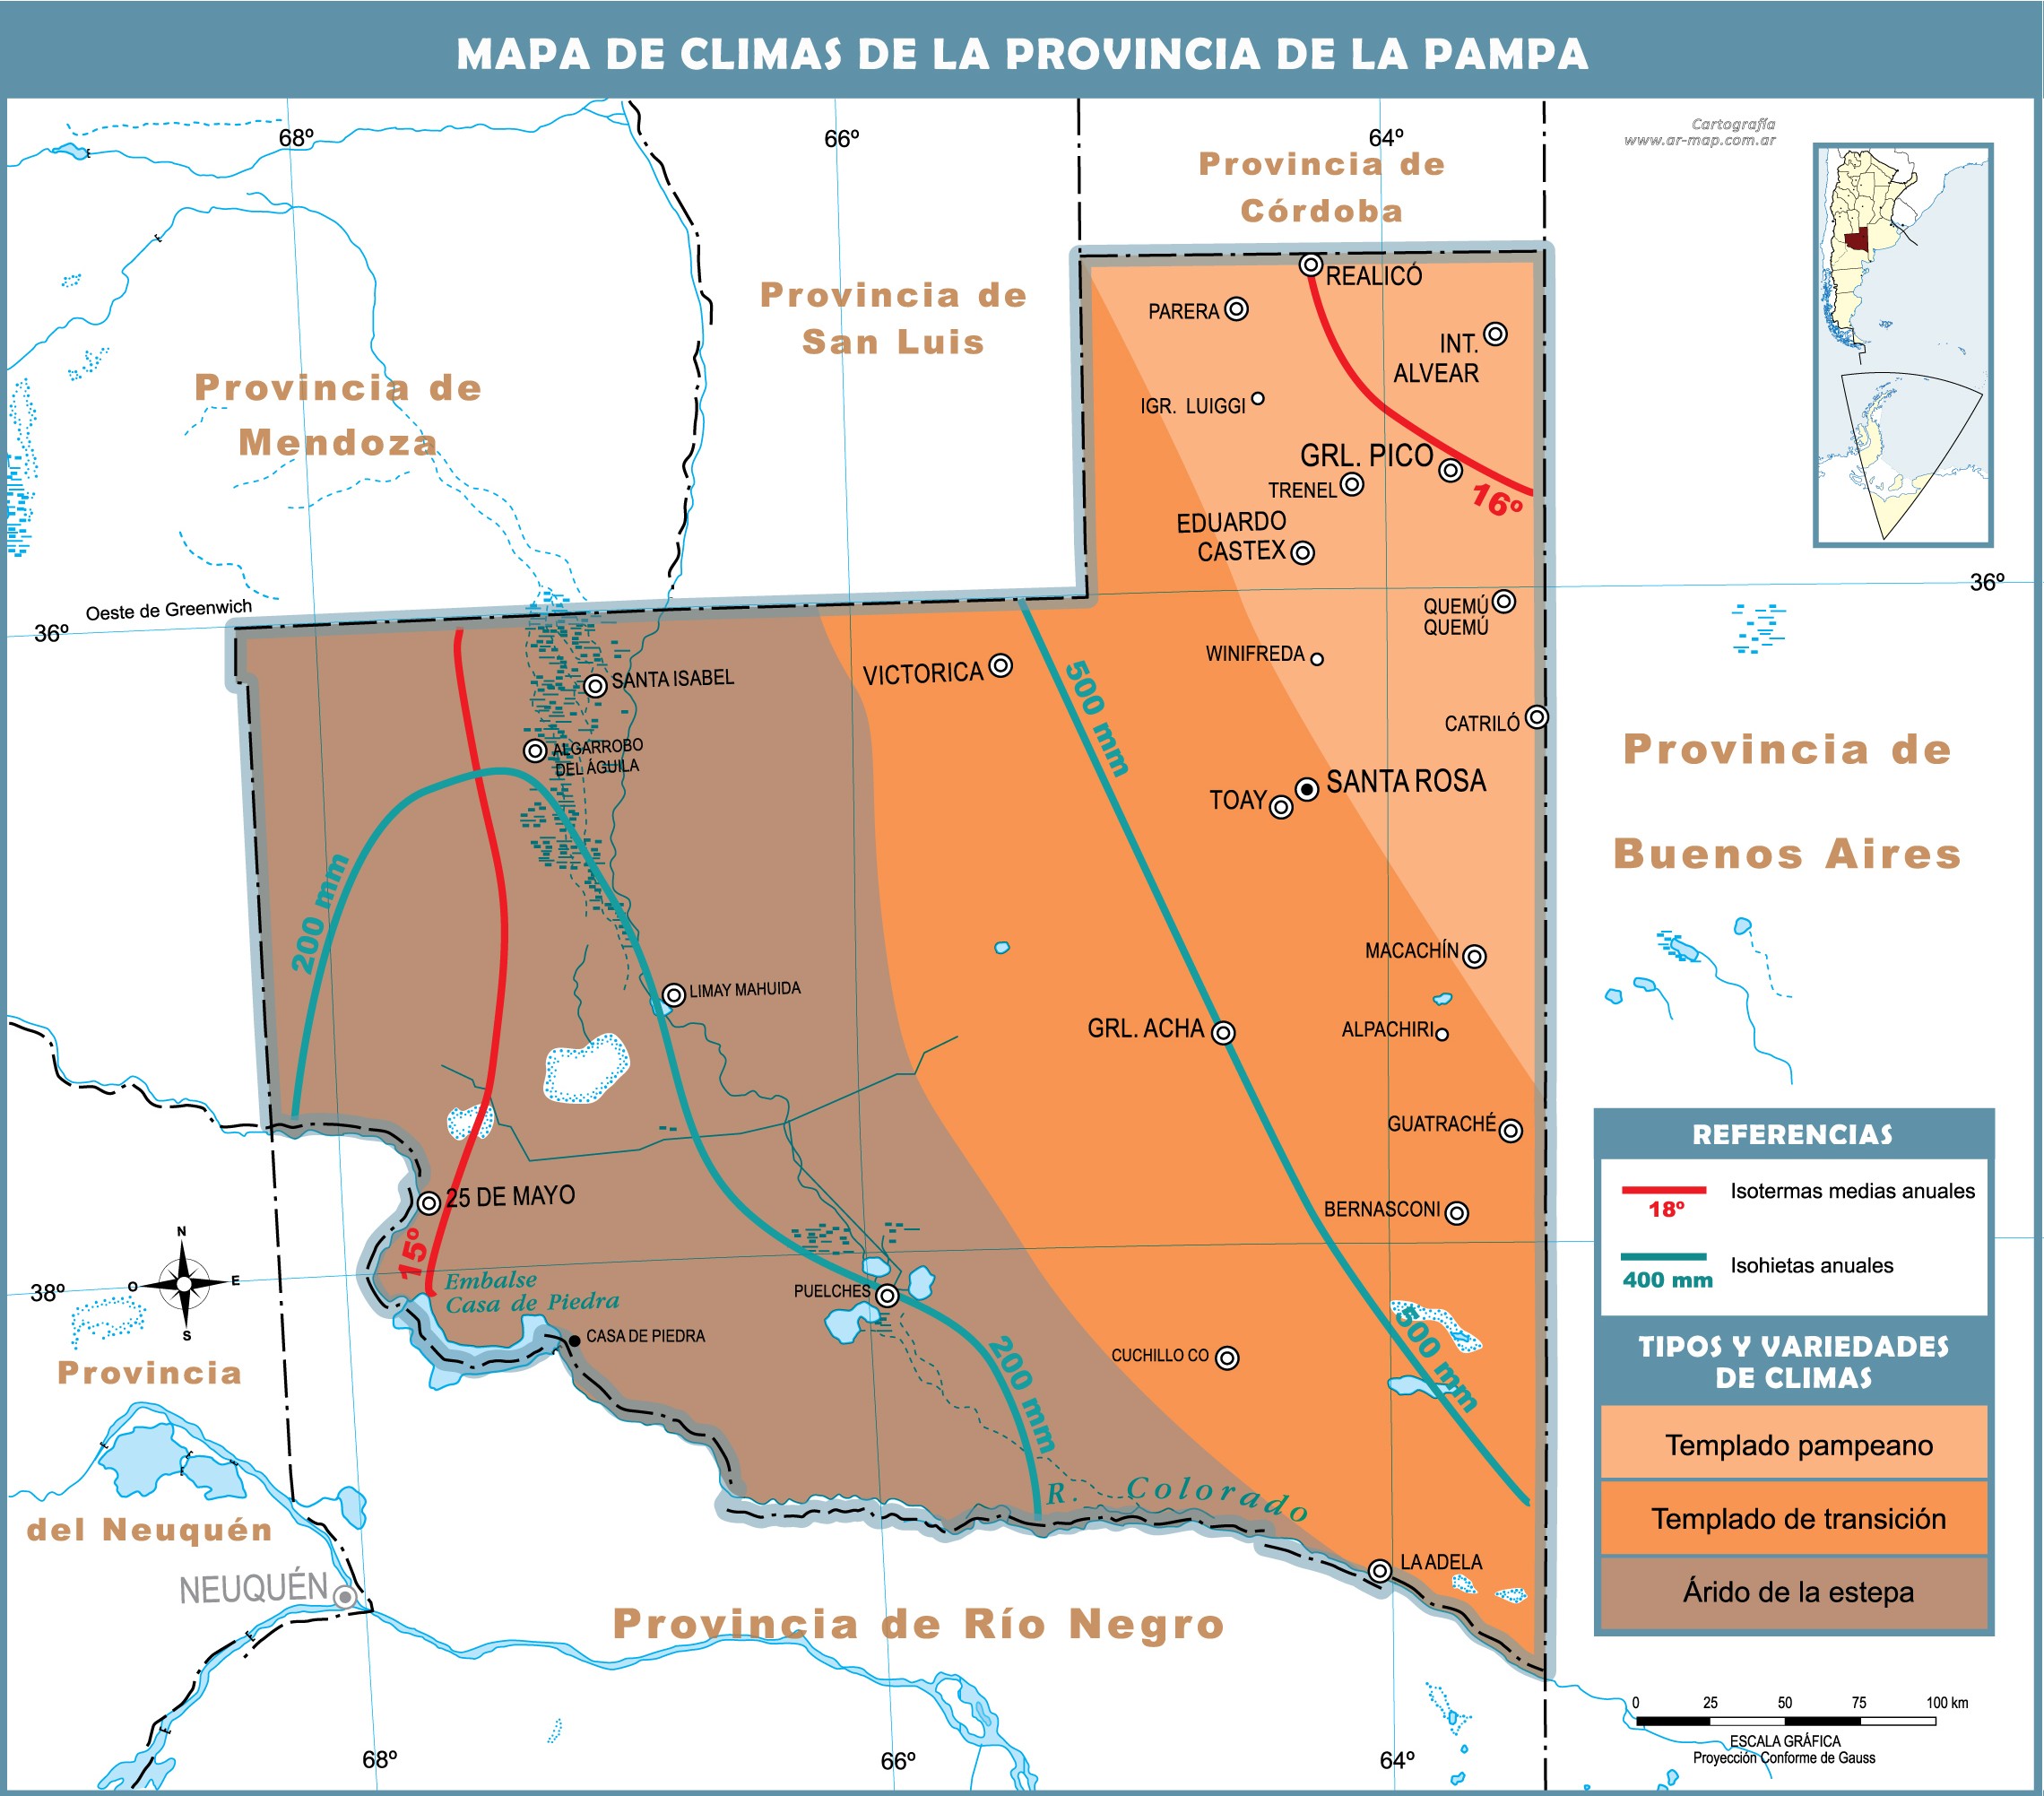 Climatic map of the Province of La Pampa | Gifex